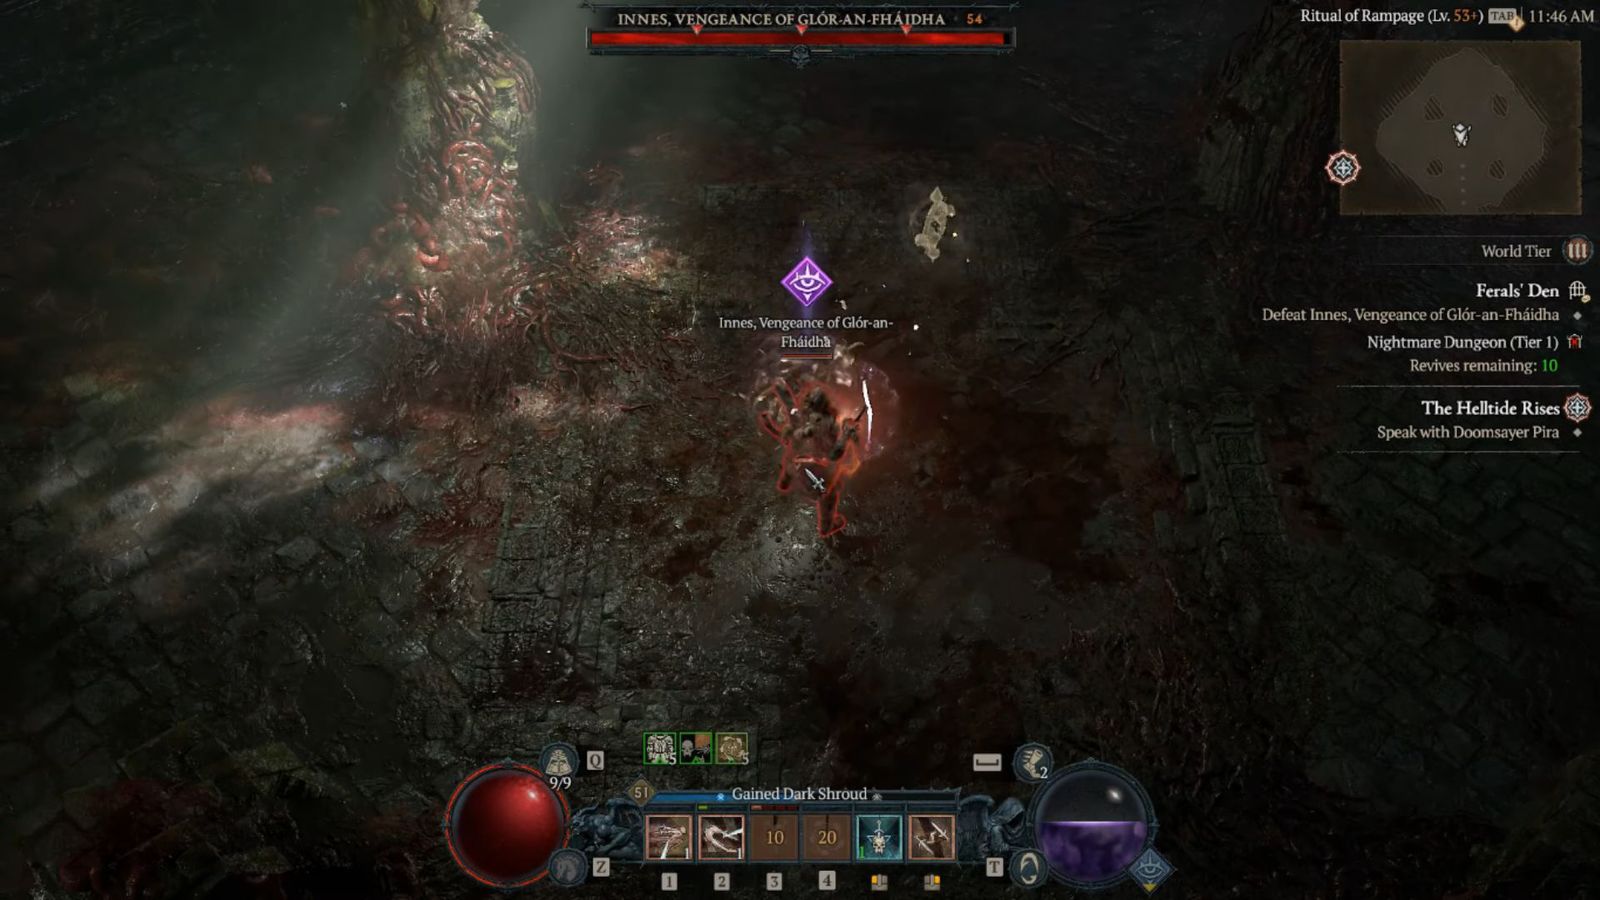 A screenshot of the Feral's Den quest with Innes, Vengeance of Glor-an-Fhaidha in Diablo 4.